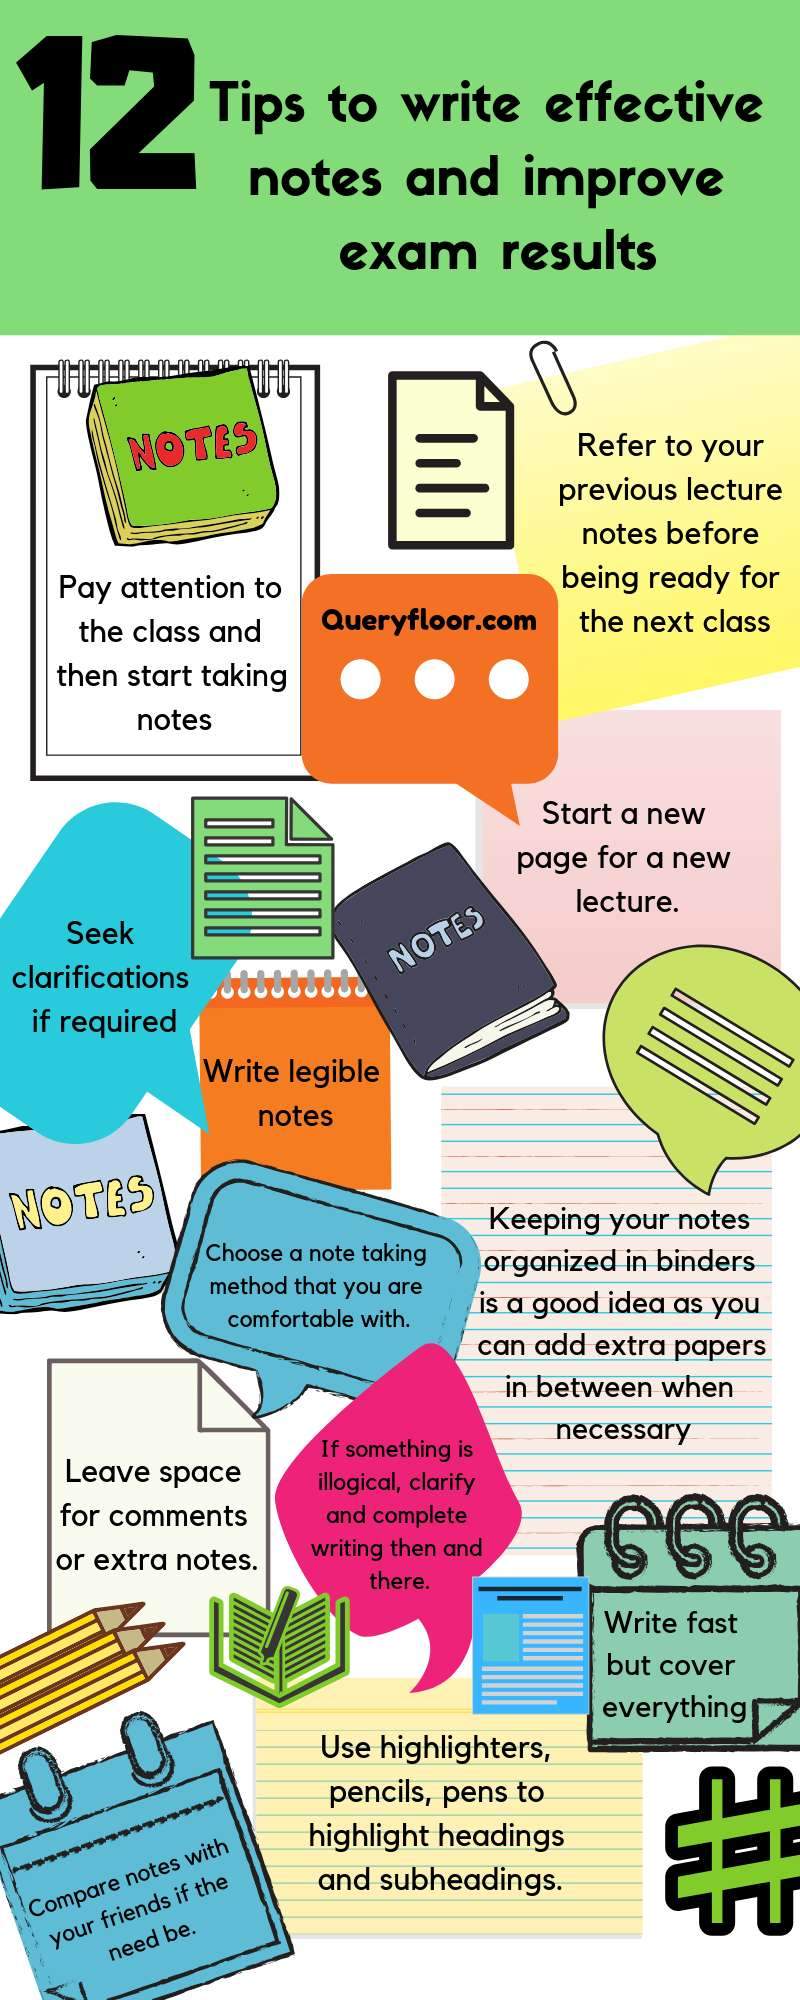 12 Tips to write effective notes and improve exam results